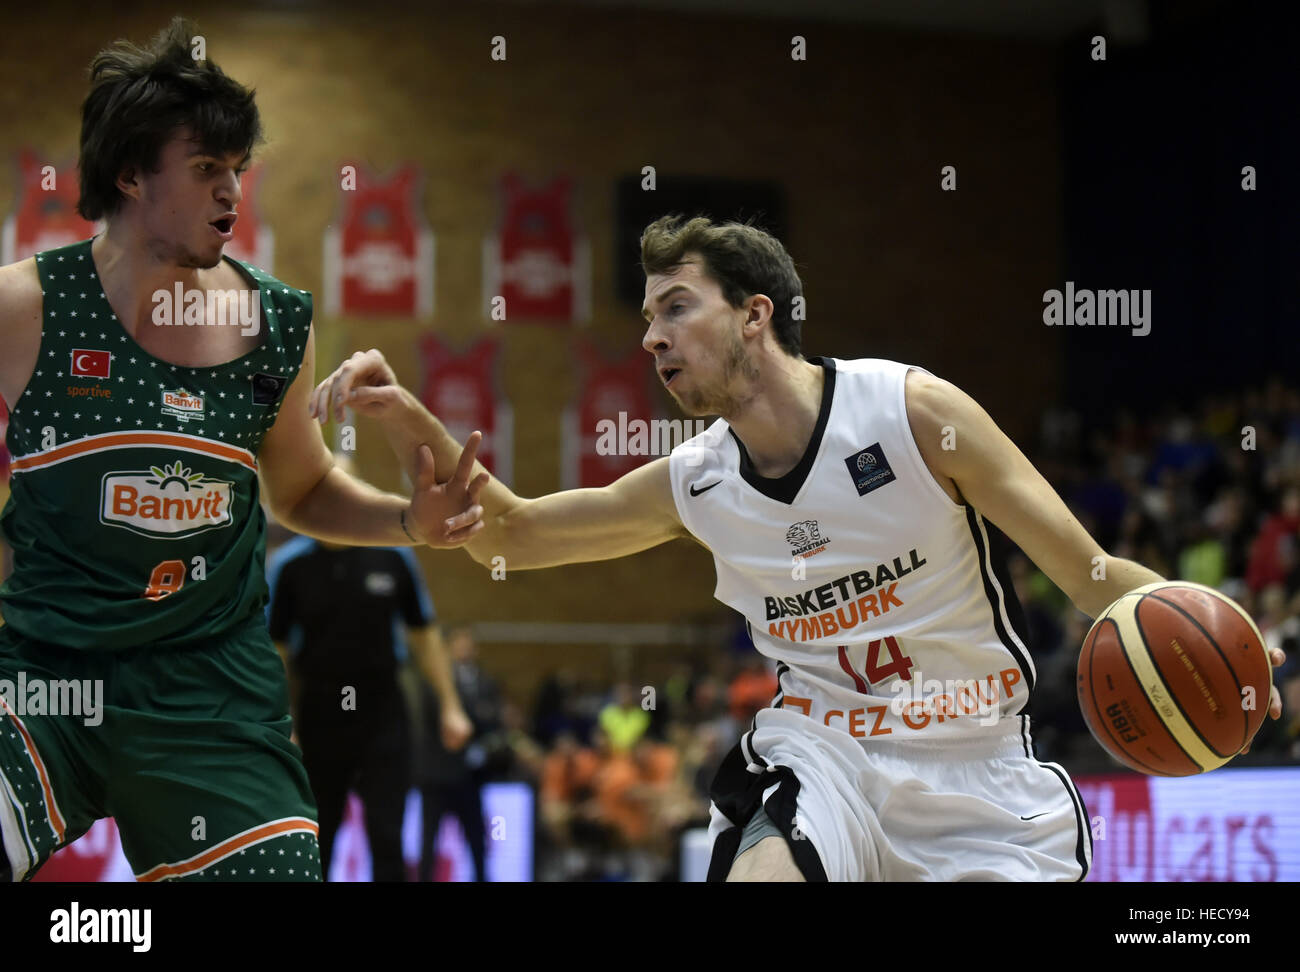 Nymburk, Czech Republic. 20th Dec, 2016. Basketball players Tolga Gecim  (L-R) of Banvit and Christopher Haas of Nymburk in action during the Men's basketball  Champions League, Group A, 10th roung game: Nymburk